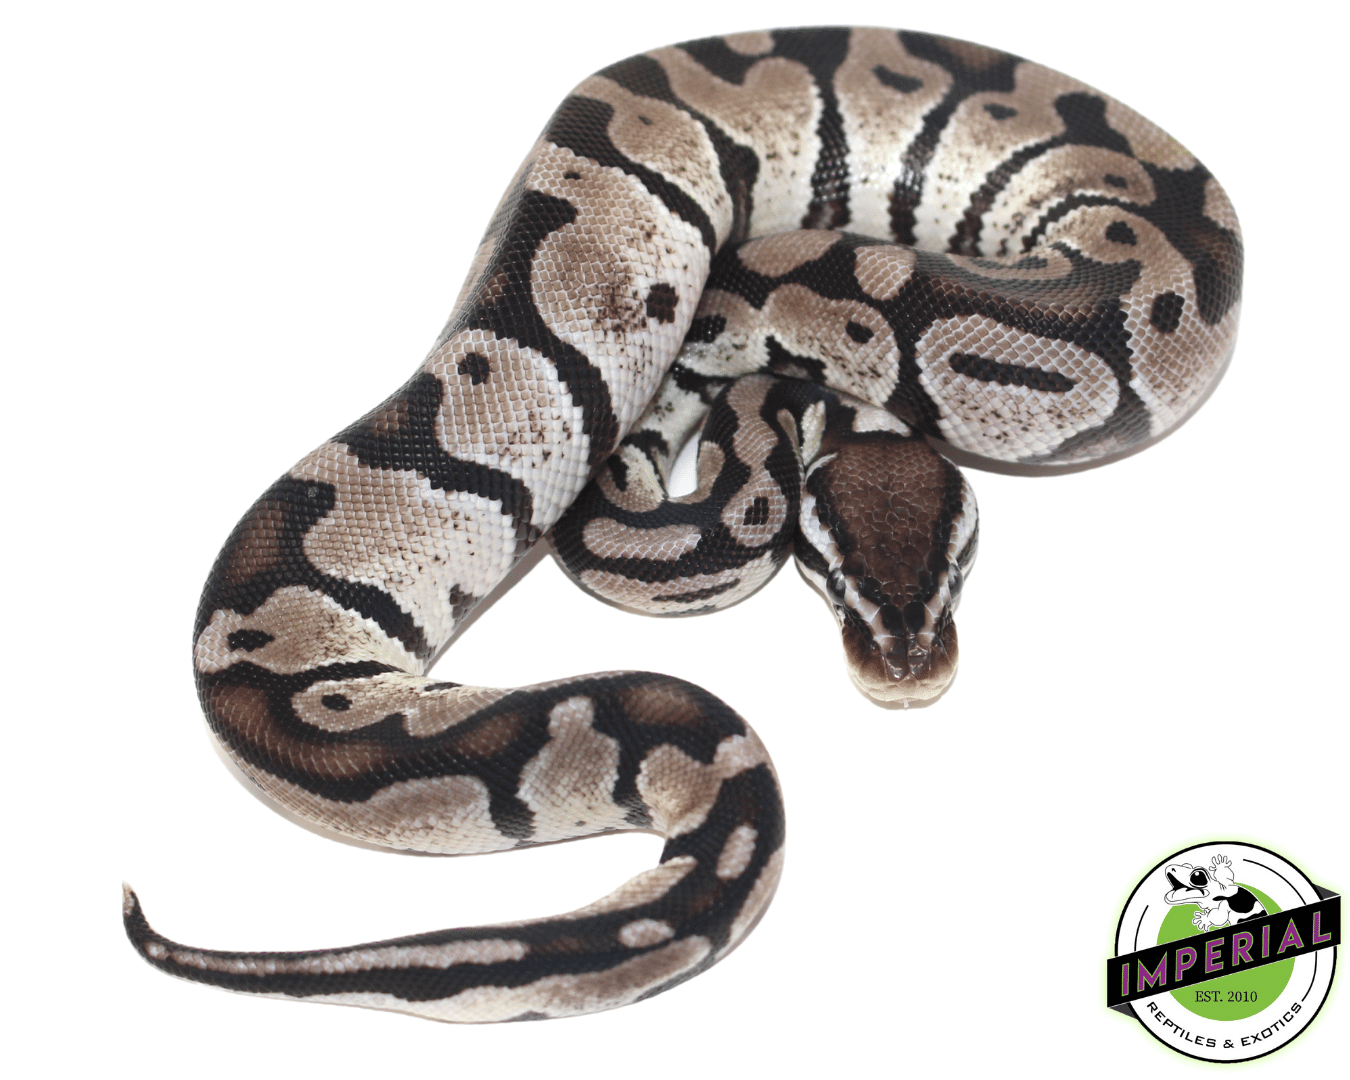 pastel axanthic ball python for sale, buy reptiles online